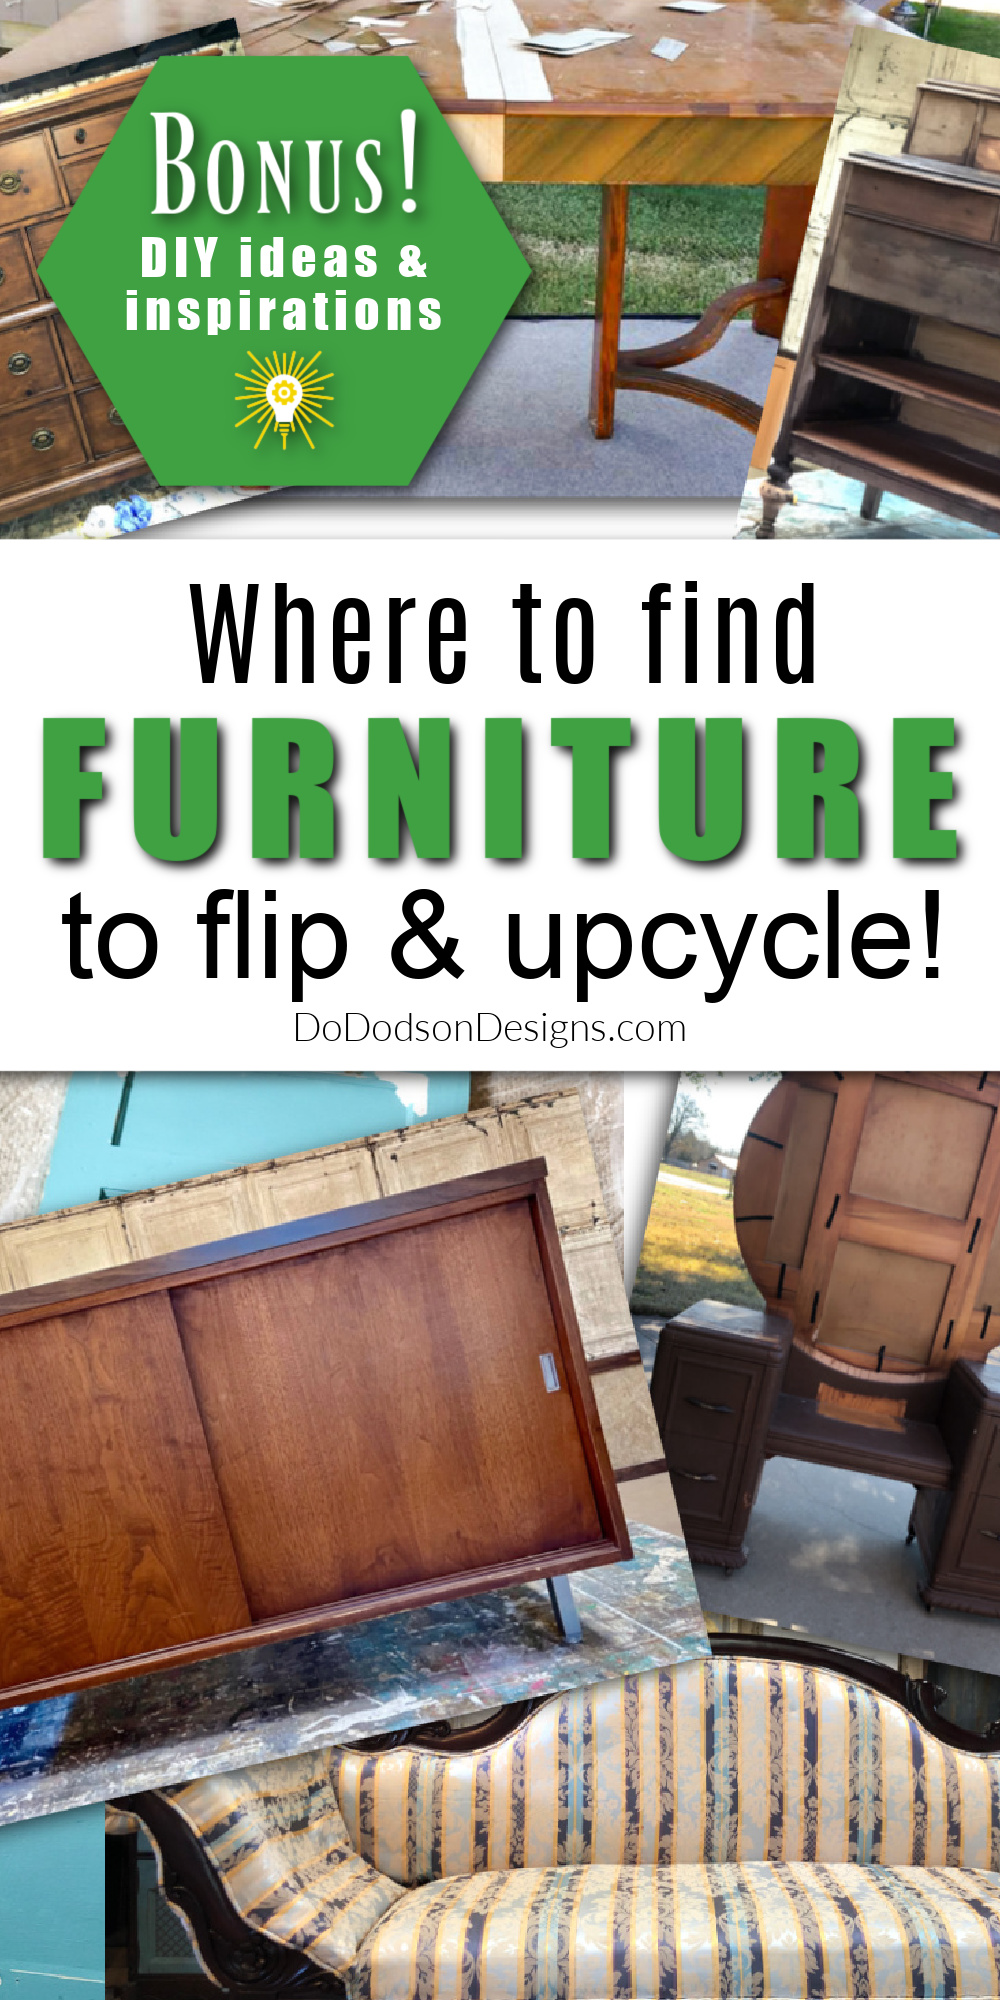 How And Where To Find Furniture To Upcycle (Easy DIY Ideas)